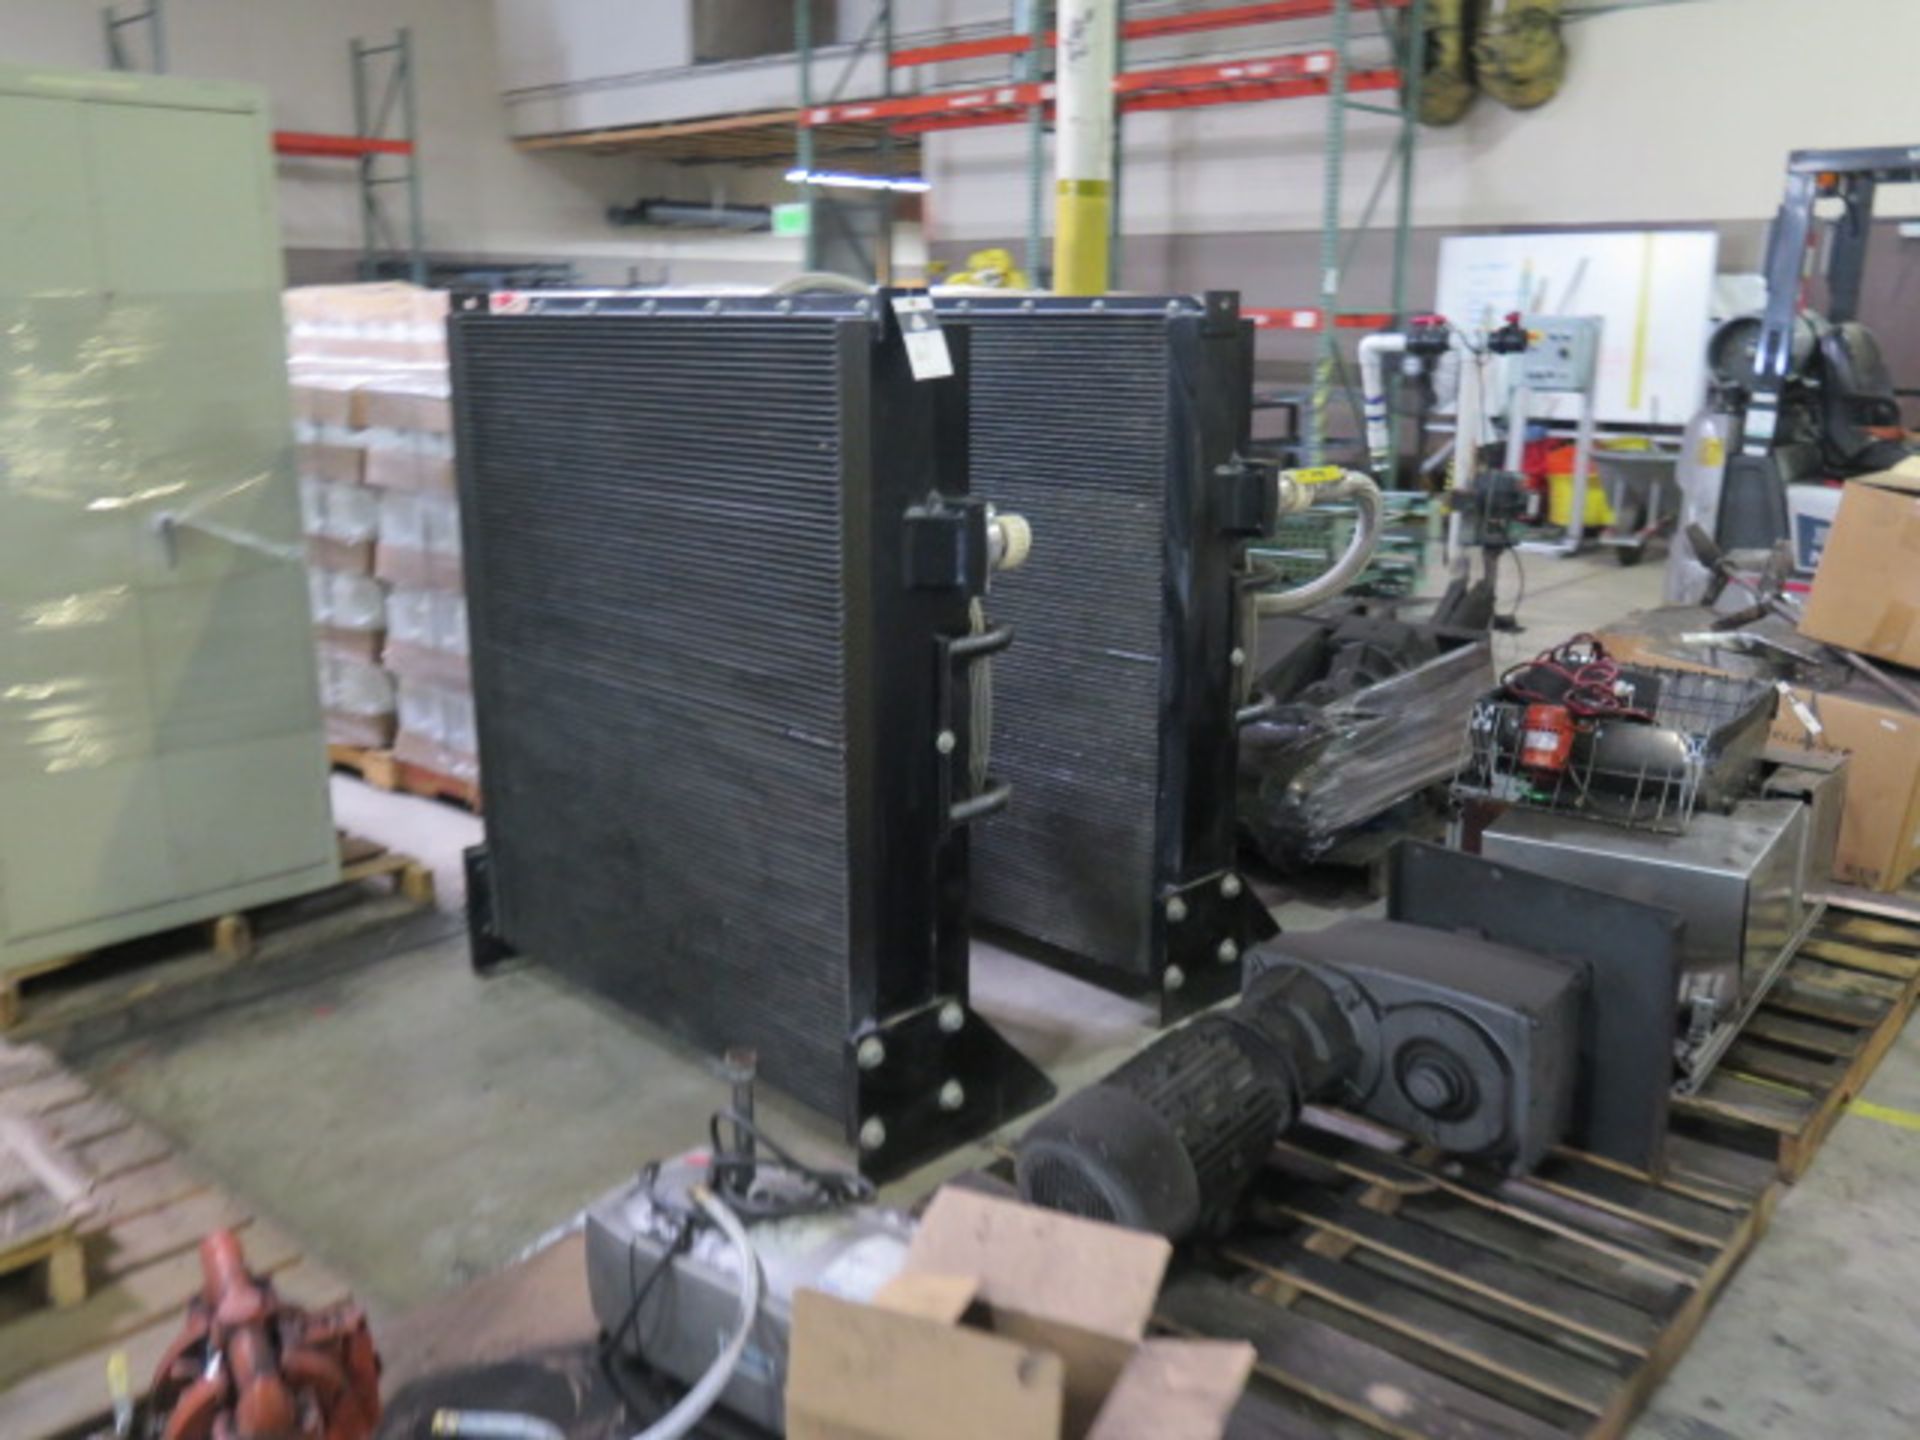 Wet Biochar Line Consisting of : 4000 Lb Cap Bag Loading System SOLD AS IS WITH NO WARRANTY - Image 15 of 16